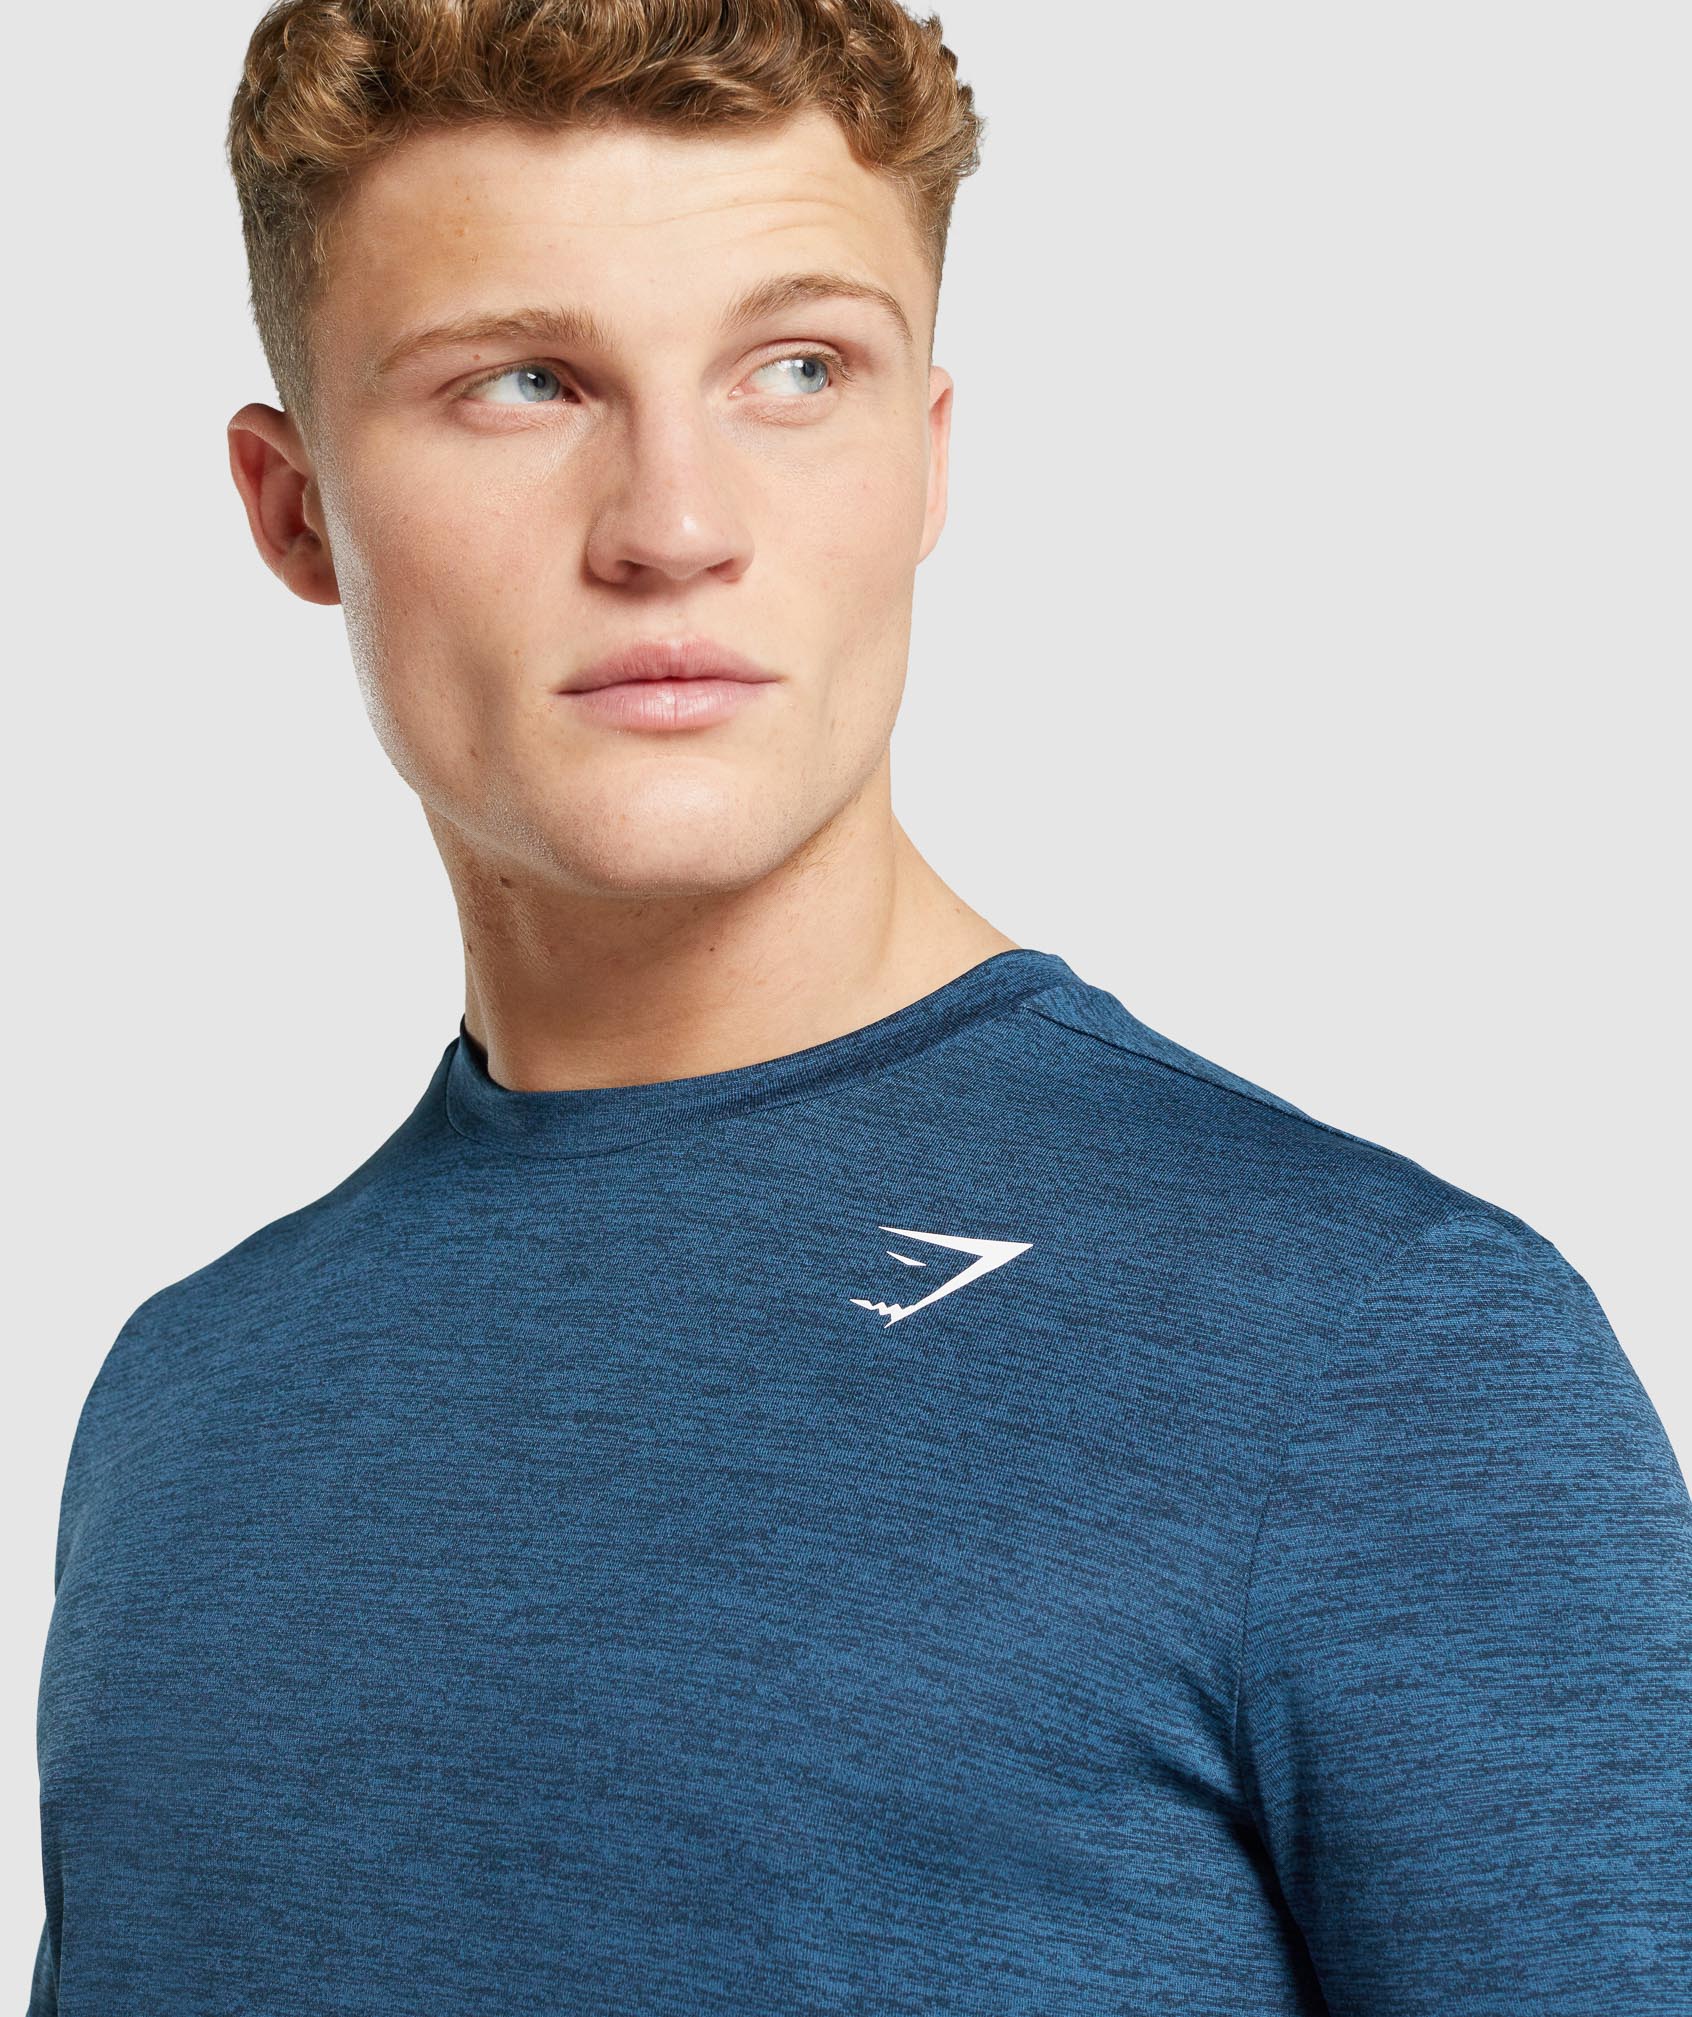 Arrival Marl Long Sleeve T-Shirt in Navy Marl - view 4